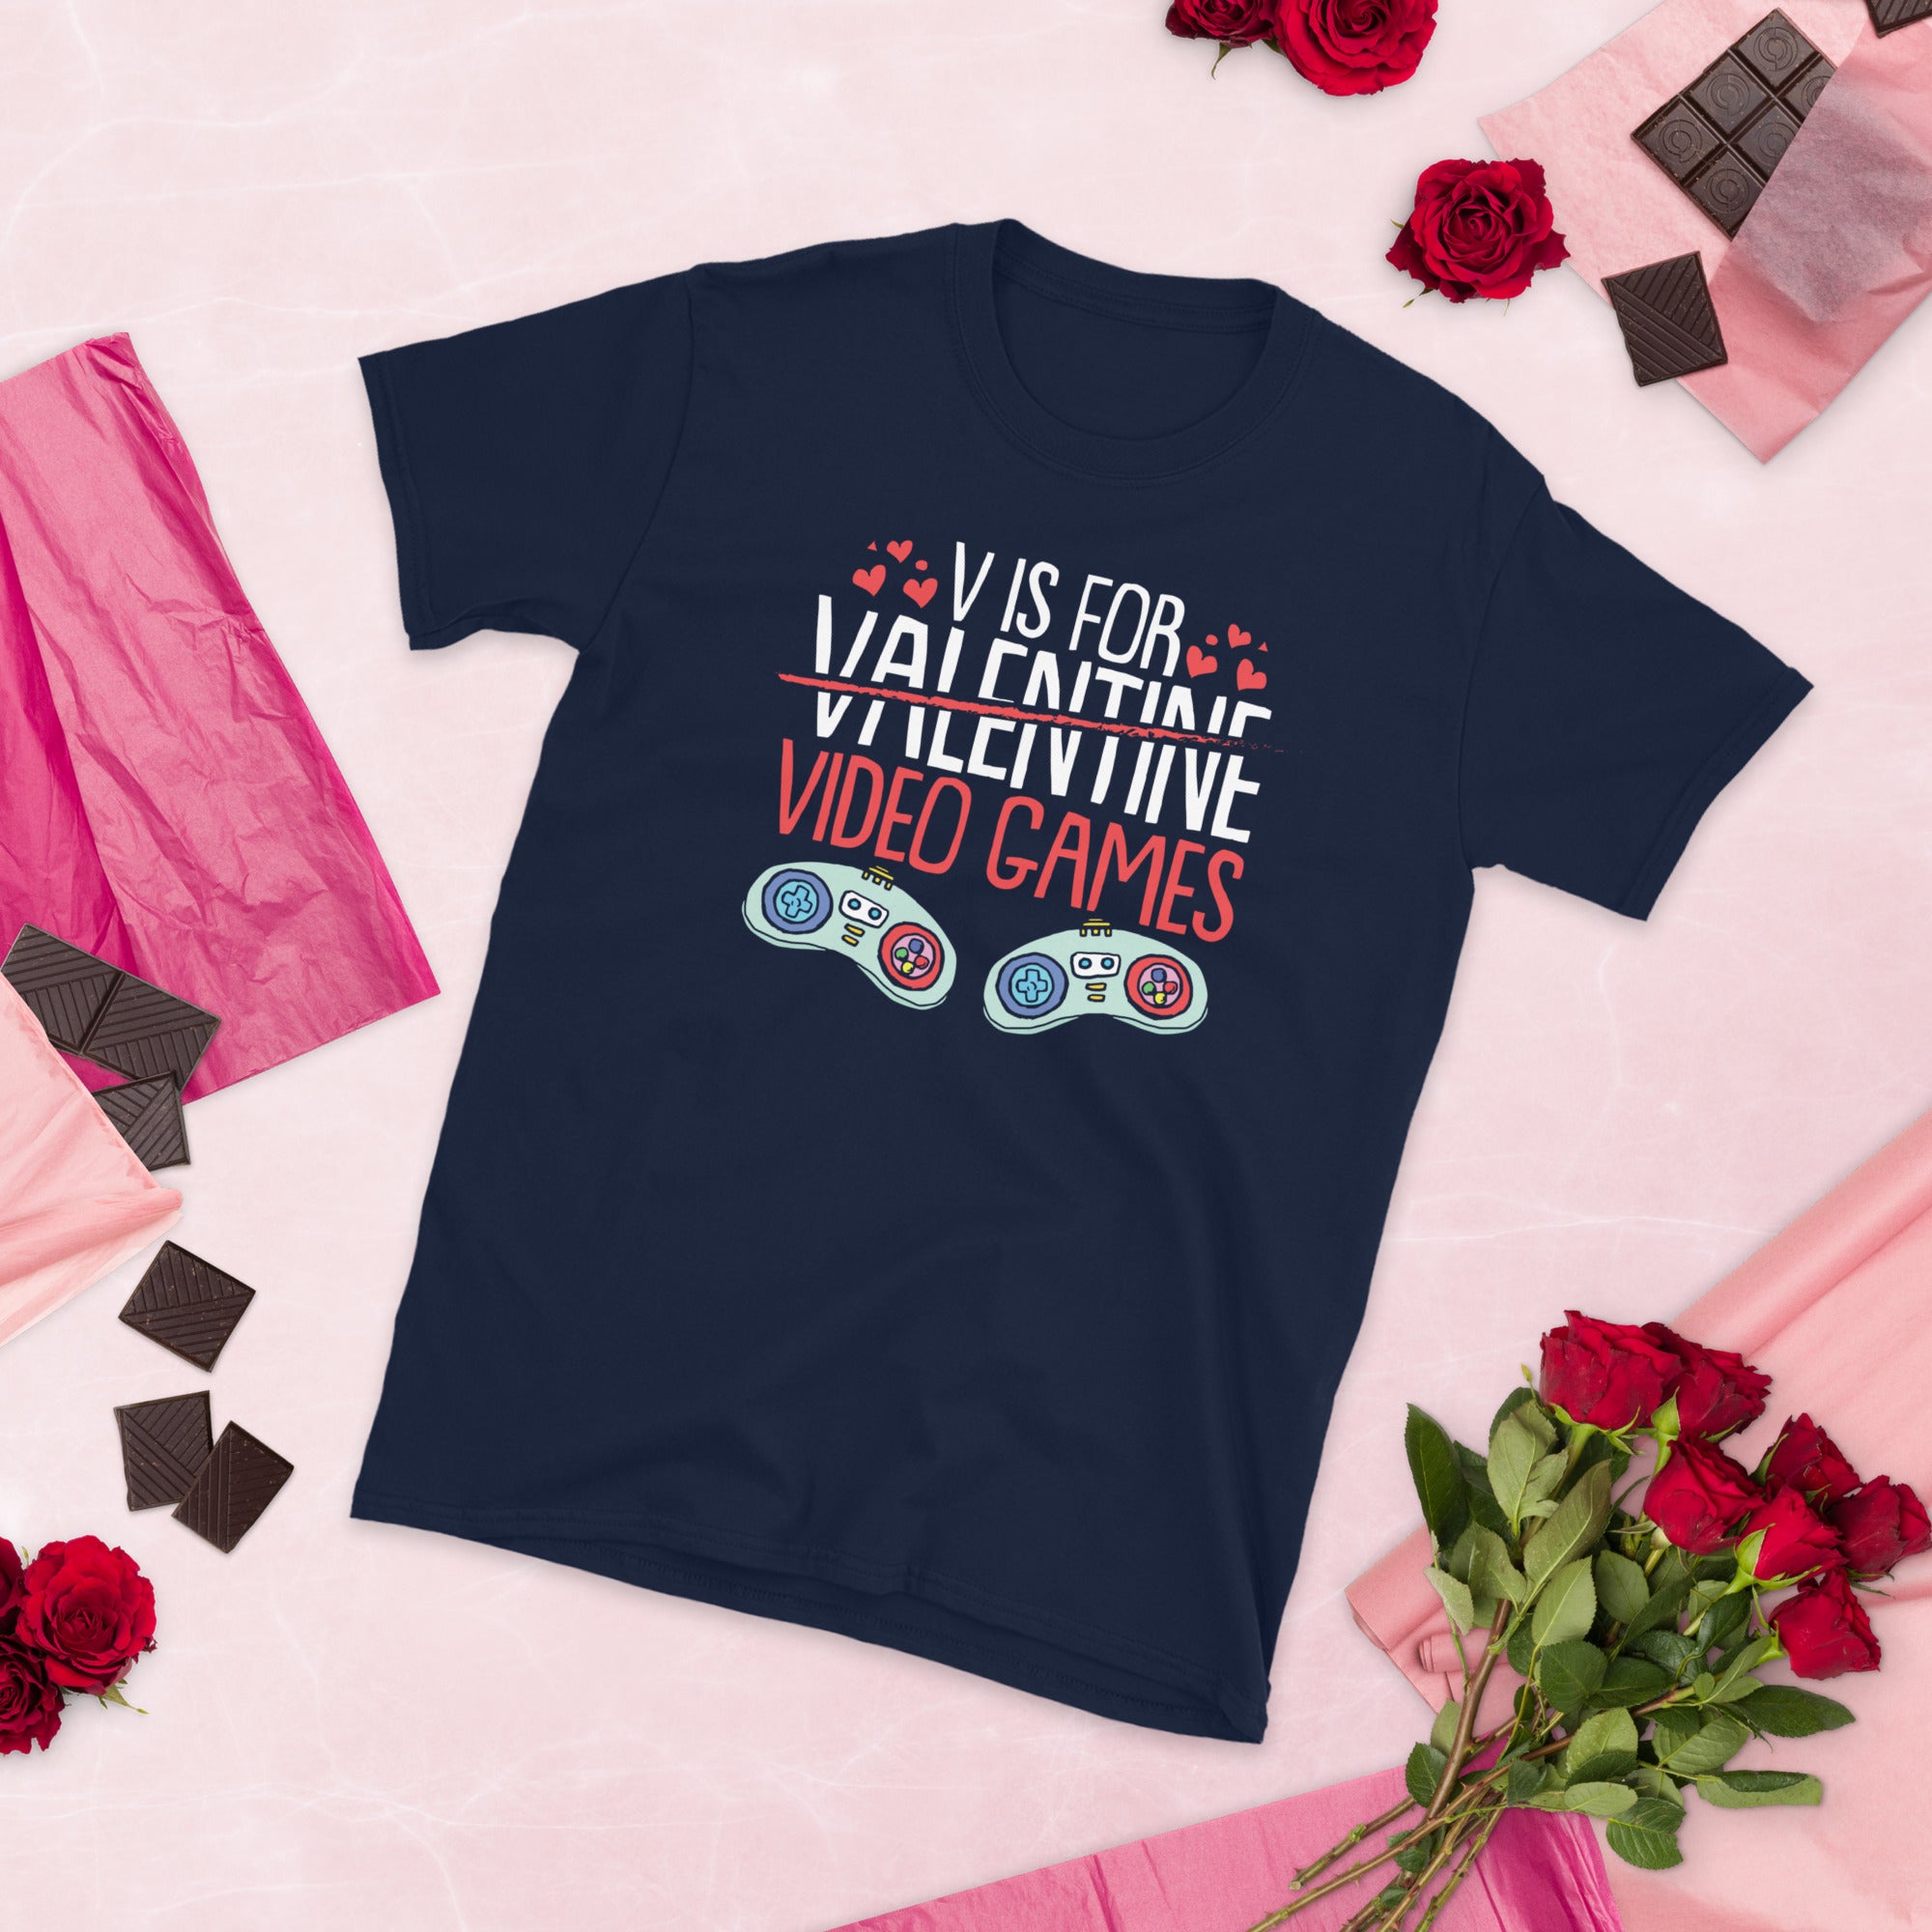 V Is For Video Games Shirt, Video Game Shirt, Gifts For Gamers, Gaming TShirt, Valentines Day Gaming Shirt, Funny Valentines Gamer T Shirt - Madeinsea©